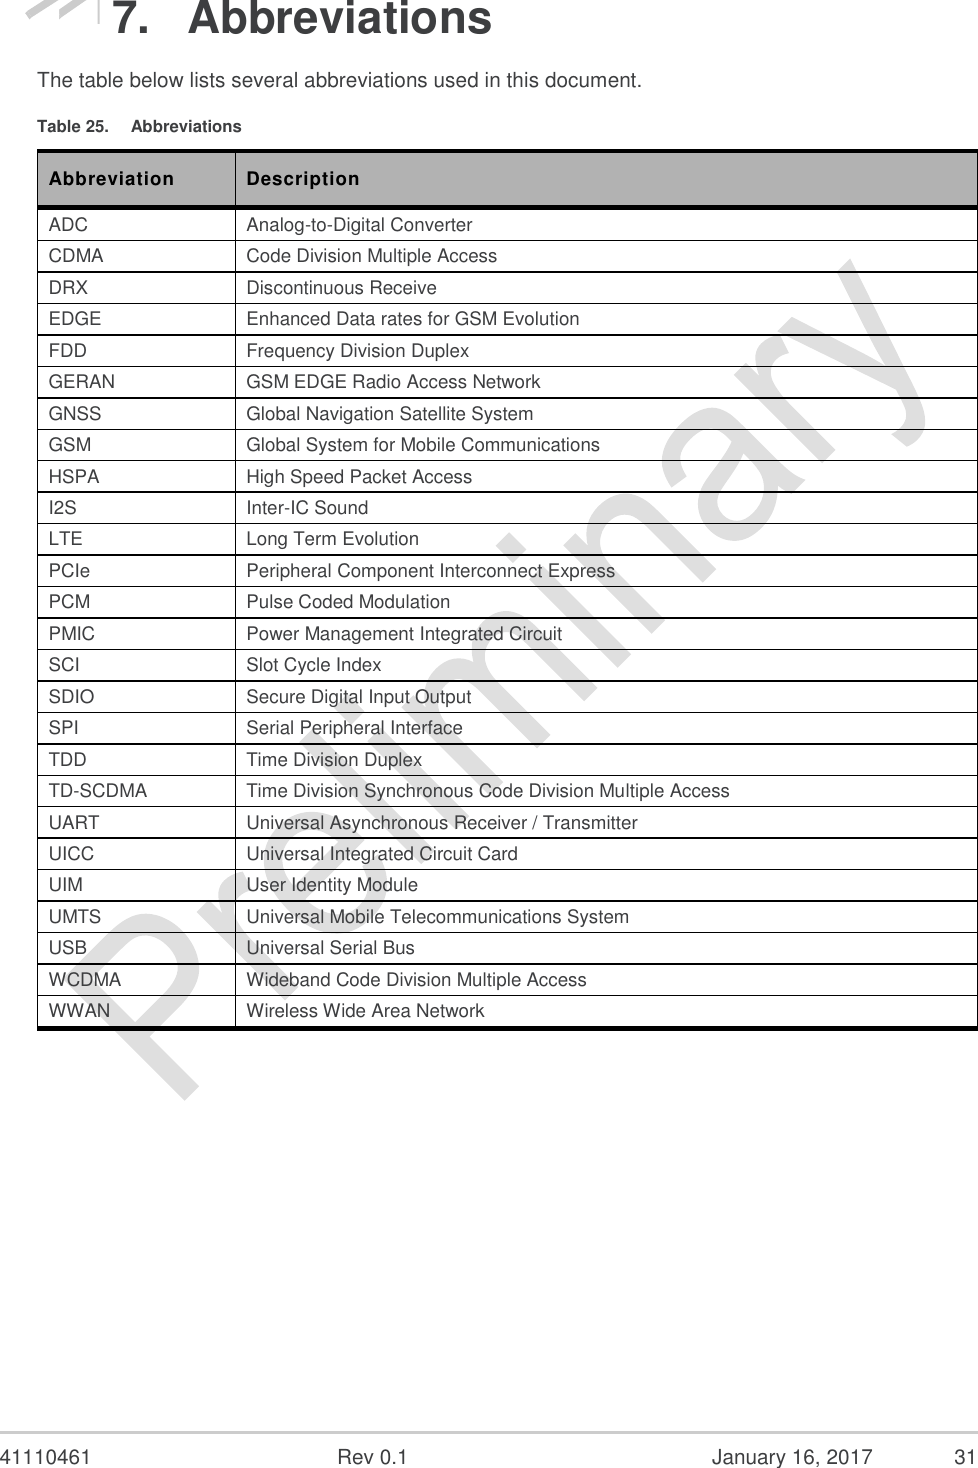  41110461  Rev 0.1  January 16, 2017  31 7.  Abbreviations The table below lists several abbreviations used in this document. Table 25.  Abbreviations Abbreviation Description ADC Analog-to-Digital Converter CDMA Code Division Multiple Access DRX Discontinuous Receive EDGE Enhanced Data rates for GSM Evolution FDD Frequency Division Duplex GERAN GSM EDGE Radio Access Network GNSS Global Navigation Satellite System GSM Global System for Mobile Communications HSPA High Speed Packet Access I2S Inter-IC Sound LTE Long Term Evolution PCIe Peripheral Component Interconnect Express PCM Pulse Coded Modulation PMIC Power Management Integrated Circuit SCI Slot Cycle Index SDIO Secure Digital Input Output SPI Serial Peripheral Interface TDD Time Division Duplex TD-SCDMA Time Division Synchronous Code Division Multiple Access UART Universal Asynchronous Receiver / Transmitter UICC Universal Integrated Circuit Card UIM User Identity Module UMTS Universal Mobile Telecommunications System USB Universal Serial Bus WCDMA Wideband Code Division Multiple Access WWAN Wireless Wide Area Network  